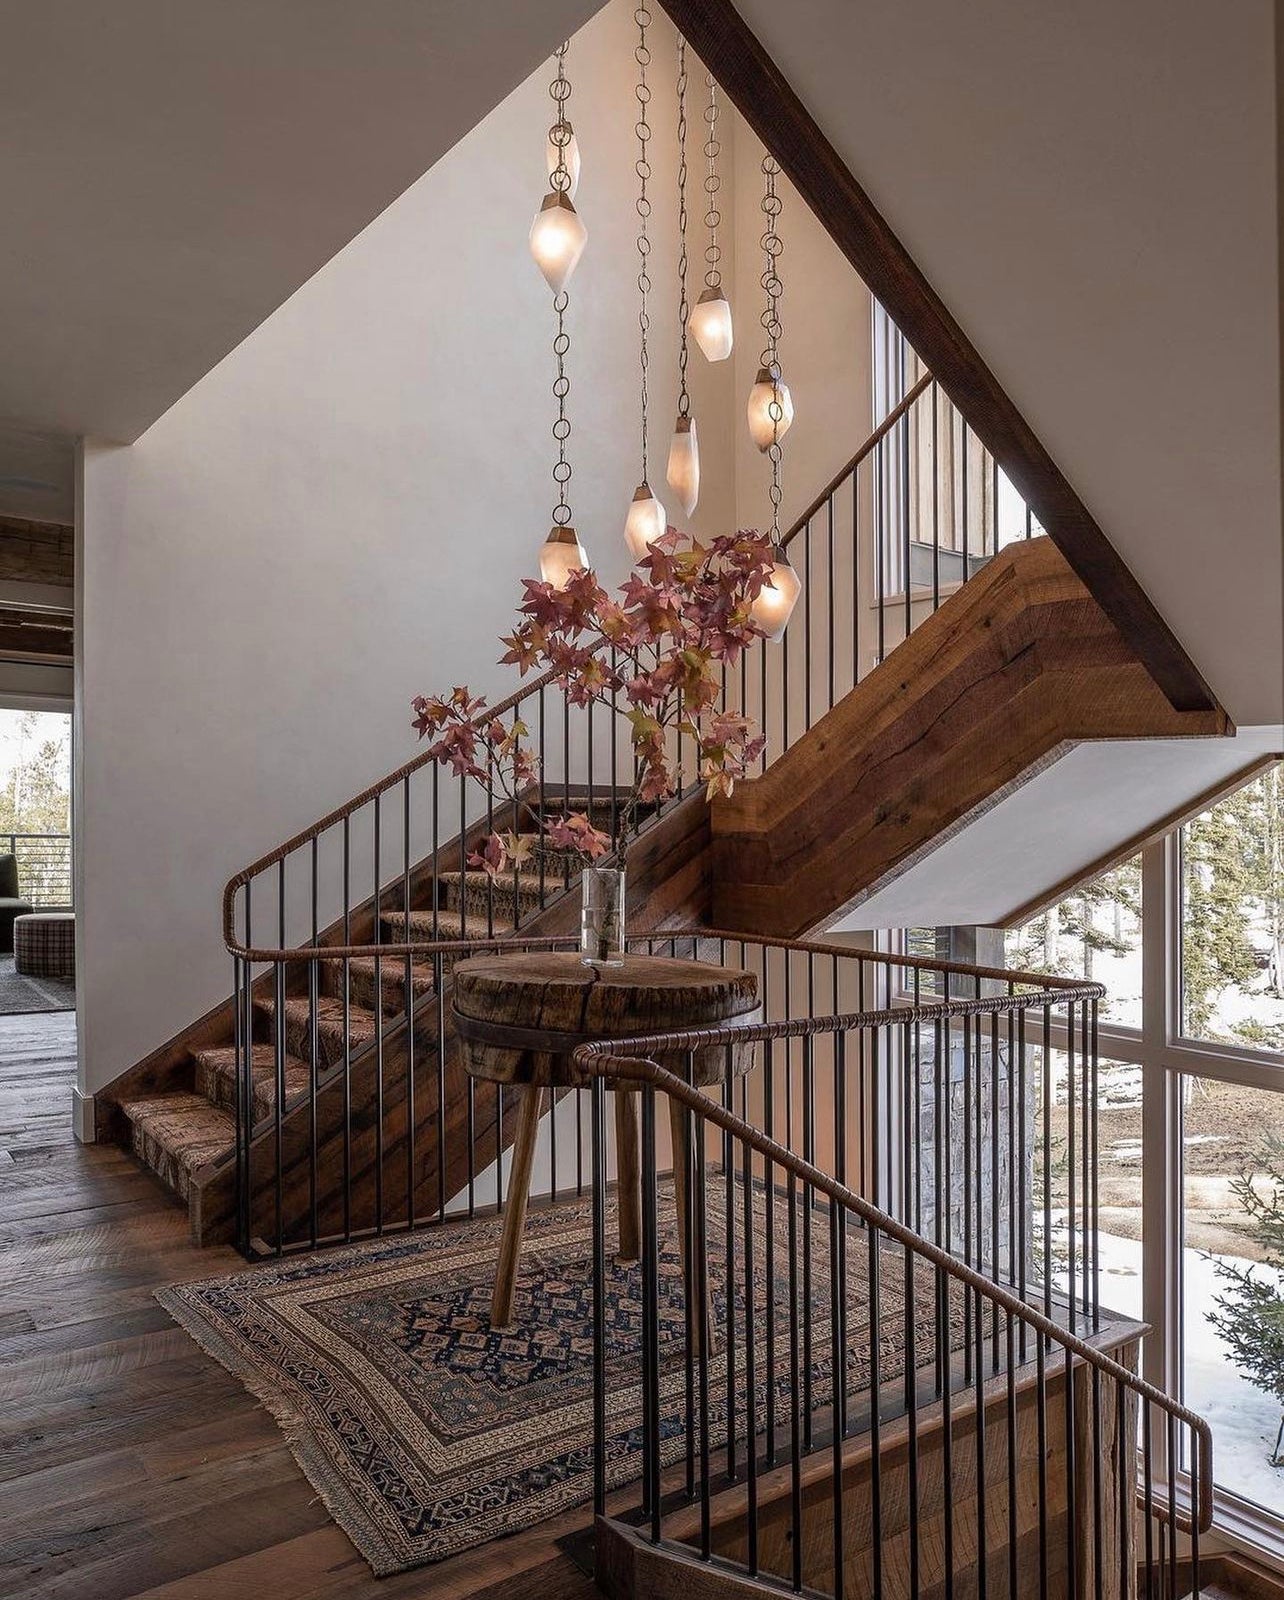 Natural Alabaster Stone Lights hung in the staircase bring art and light to the room.  Randy Zieber Lights are at Fathom Stone Art.